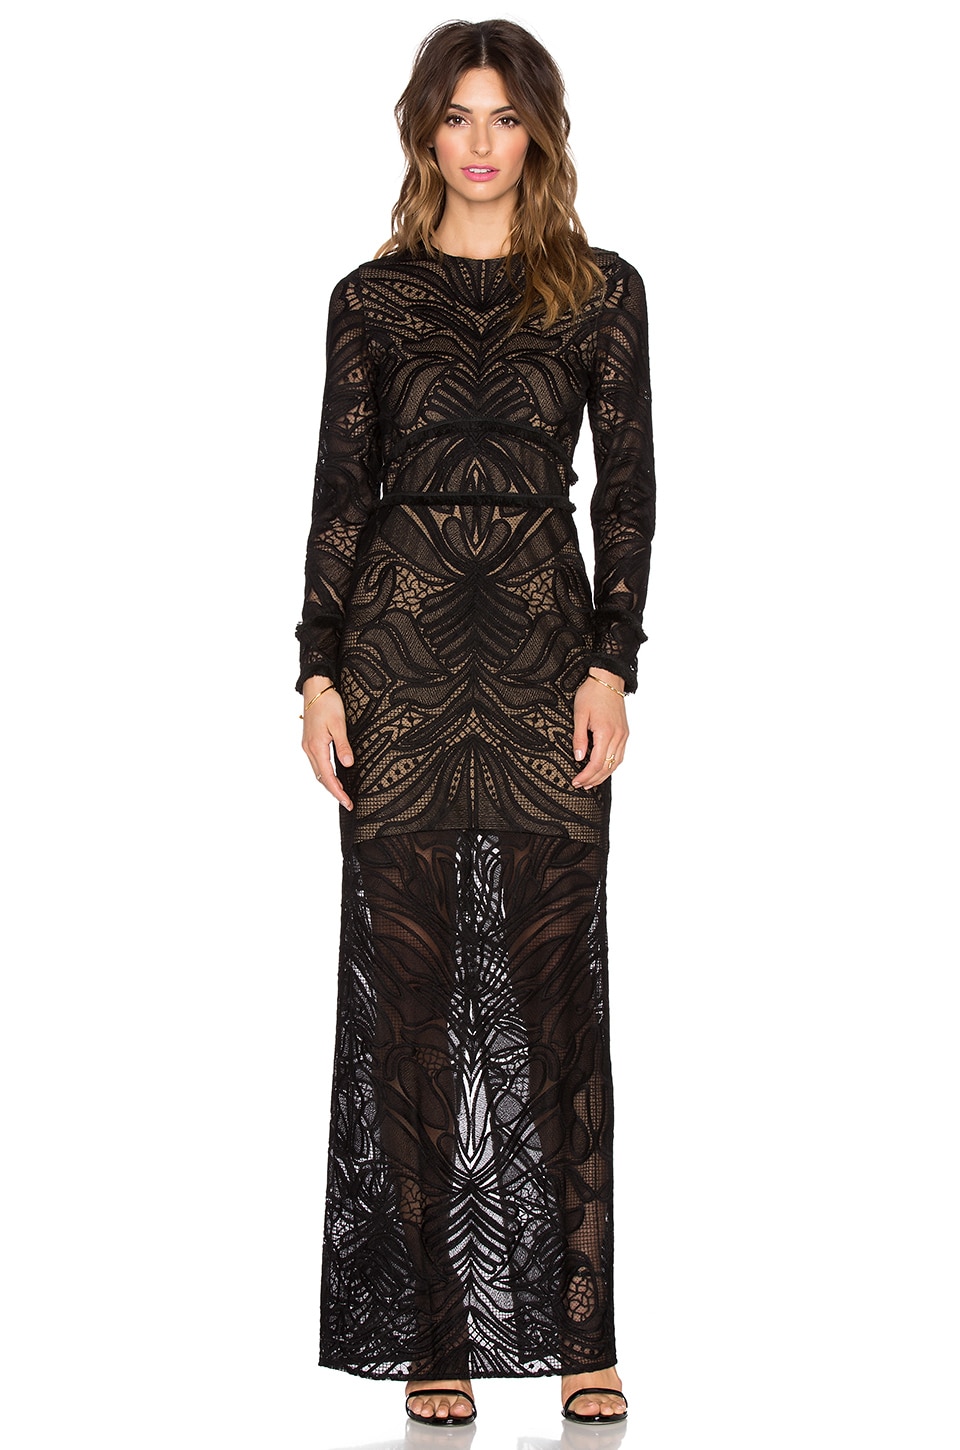 Alexis Kassidy Fringe Lace Dress in Black Lace | REVOLVE